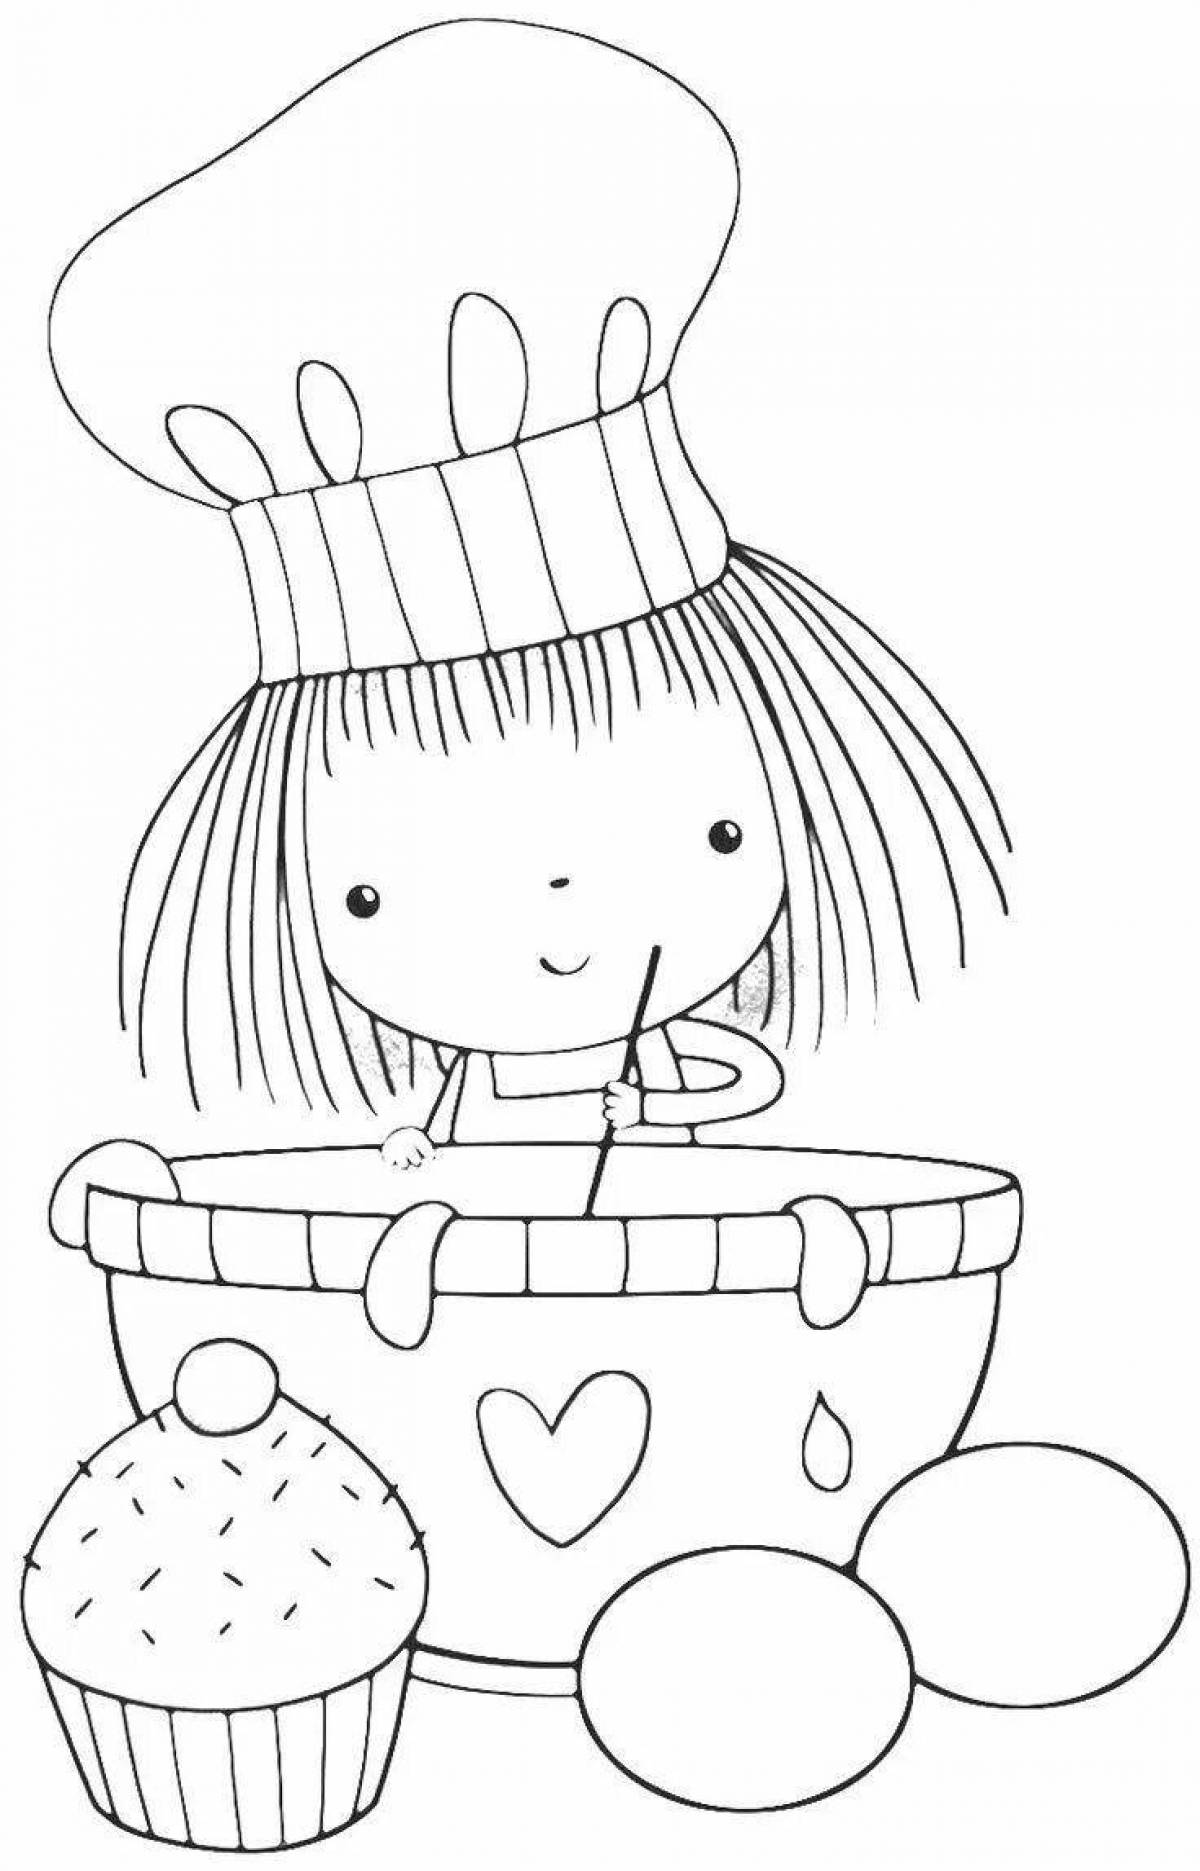 Coloring page charming confectioner